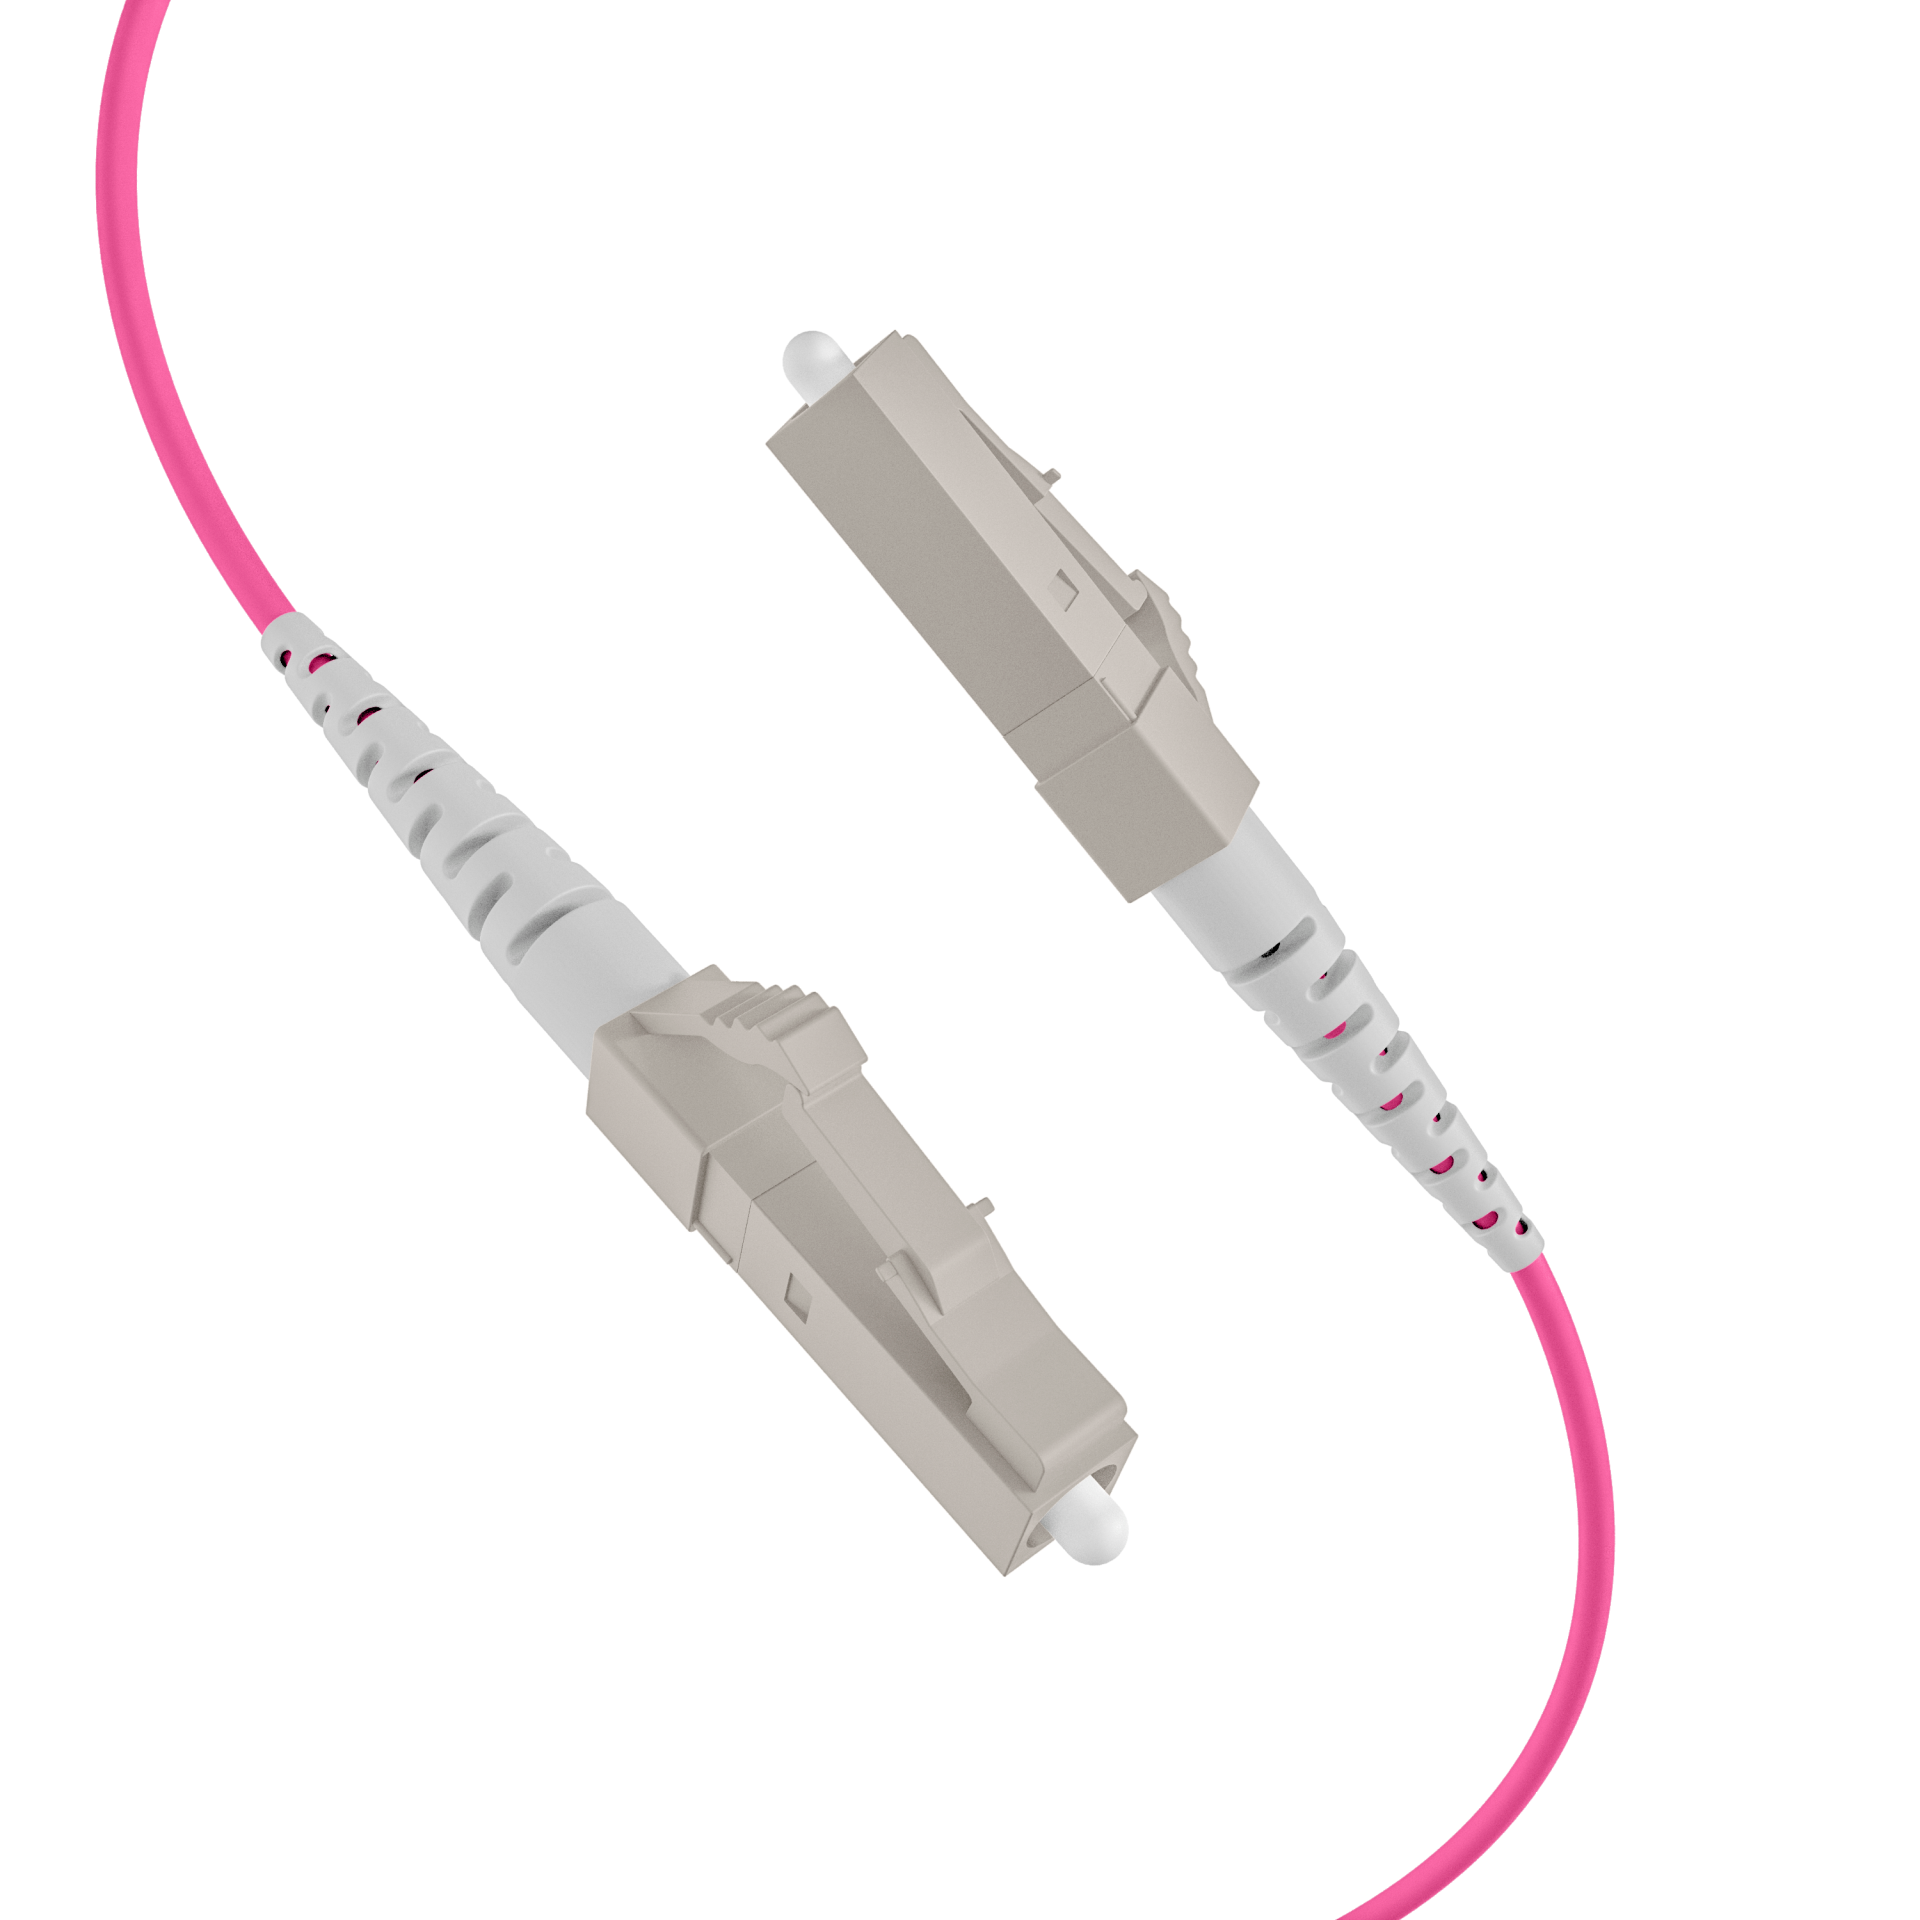 Trunkcable U-DQ(ZN)BH OM4 12G (1x12) LC-LC,130m Dca LSZH